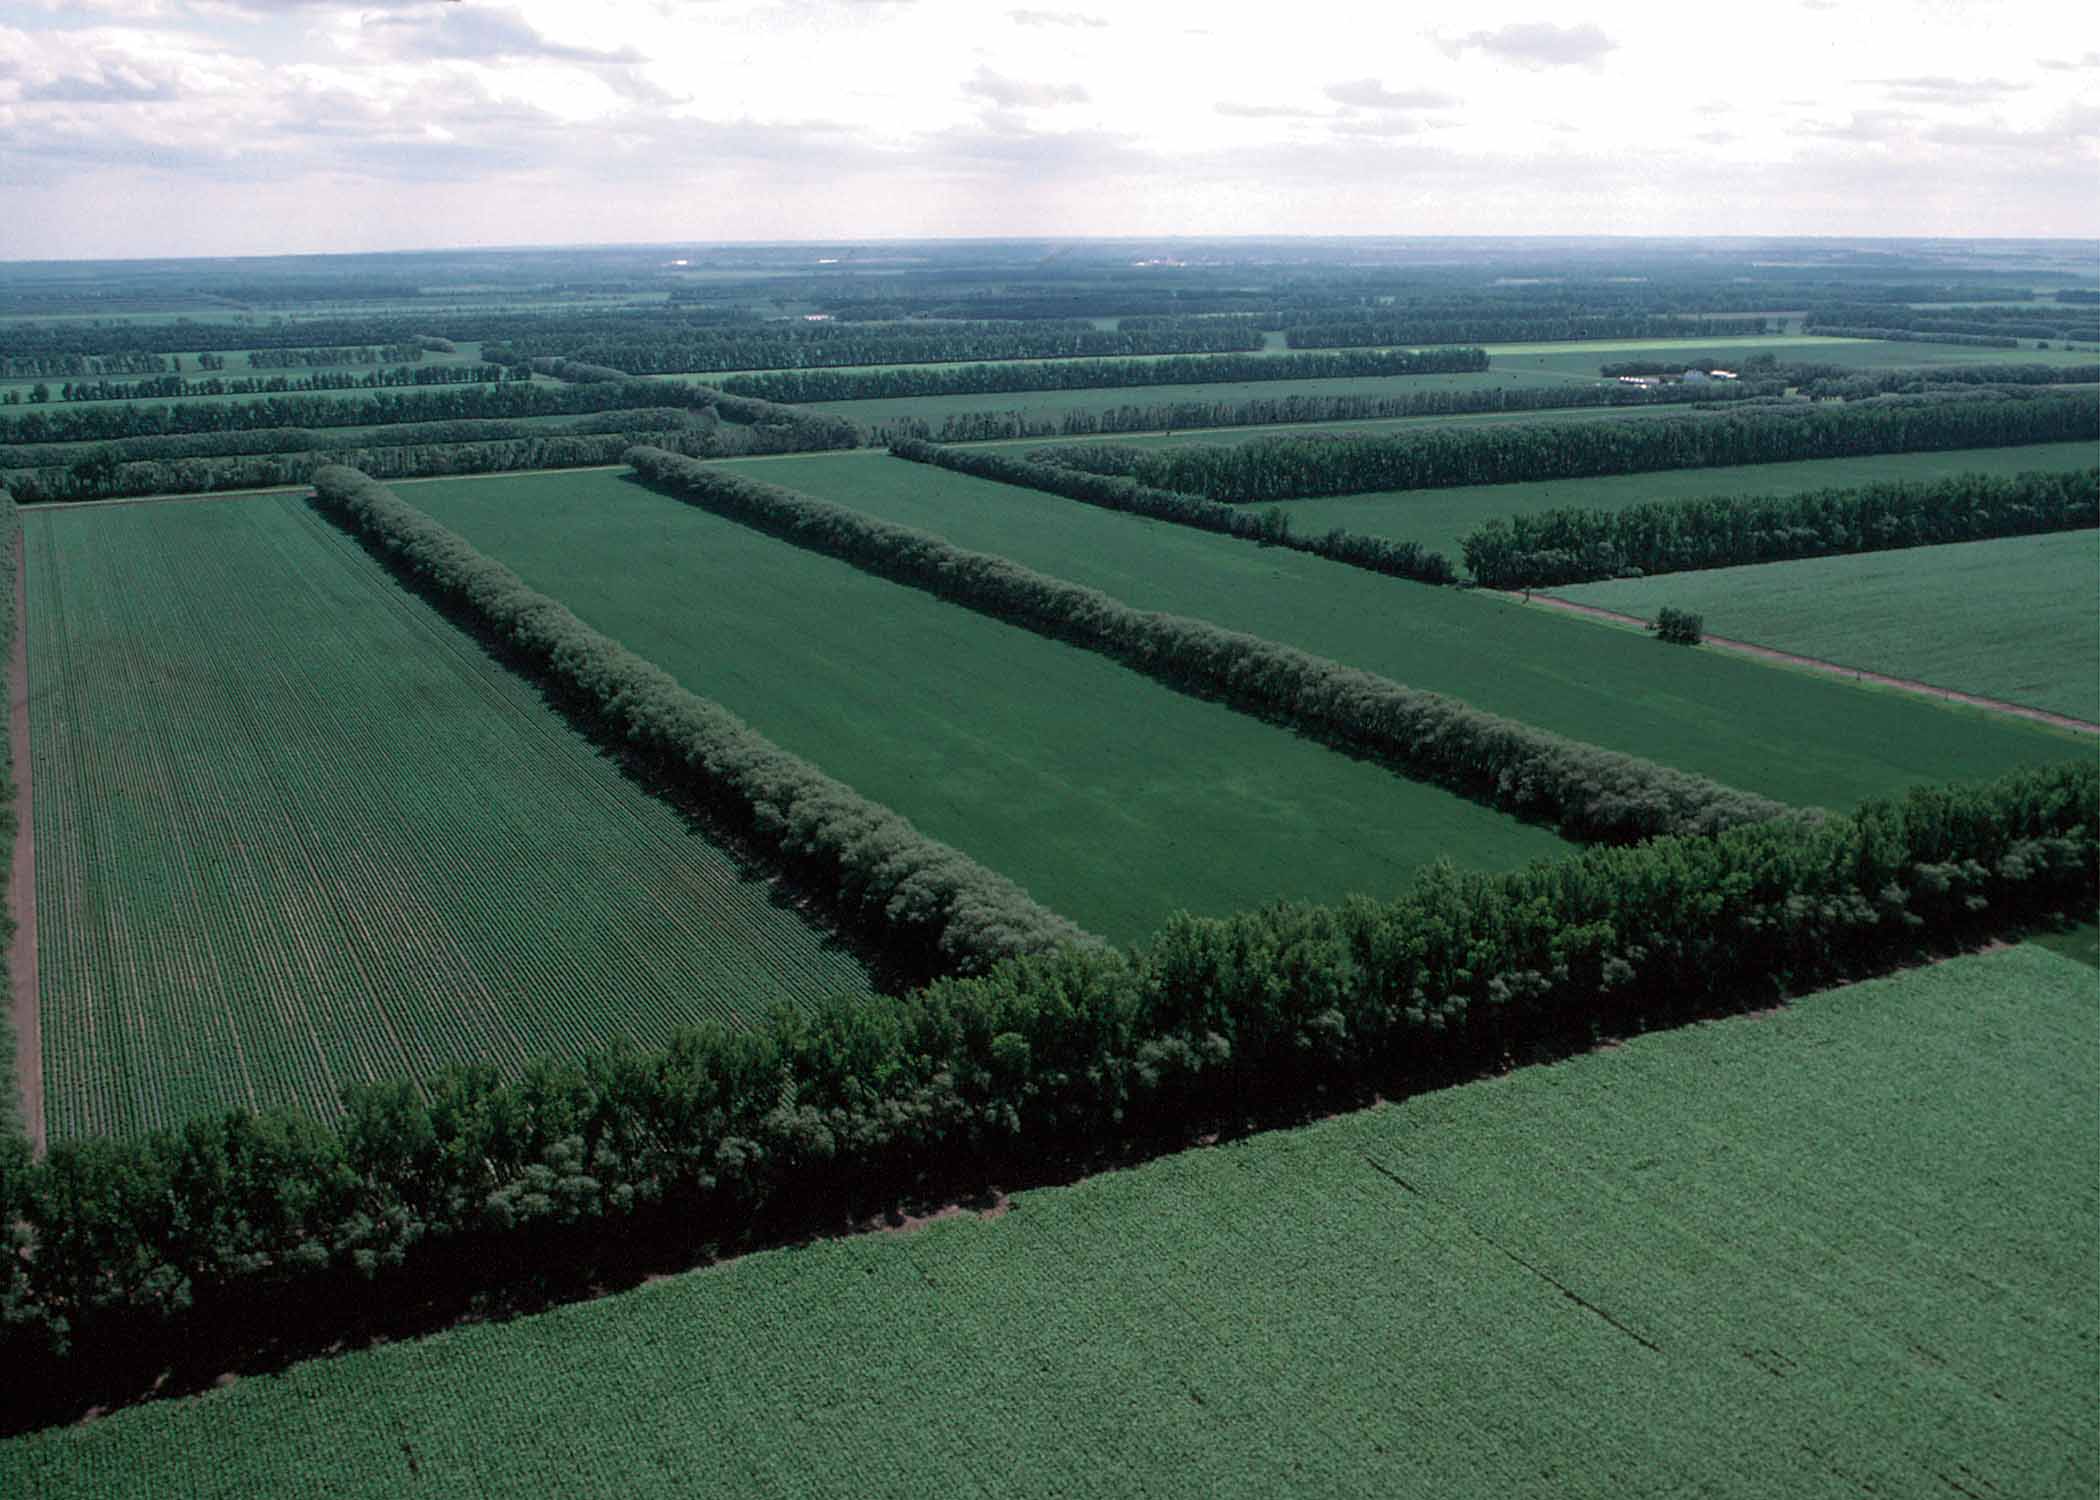 A photo of trees planted along the perimeter of farm fields.